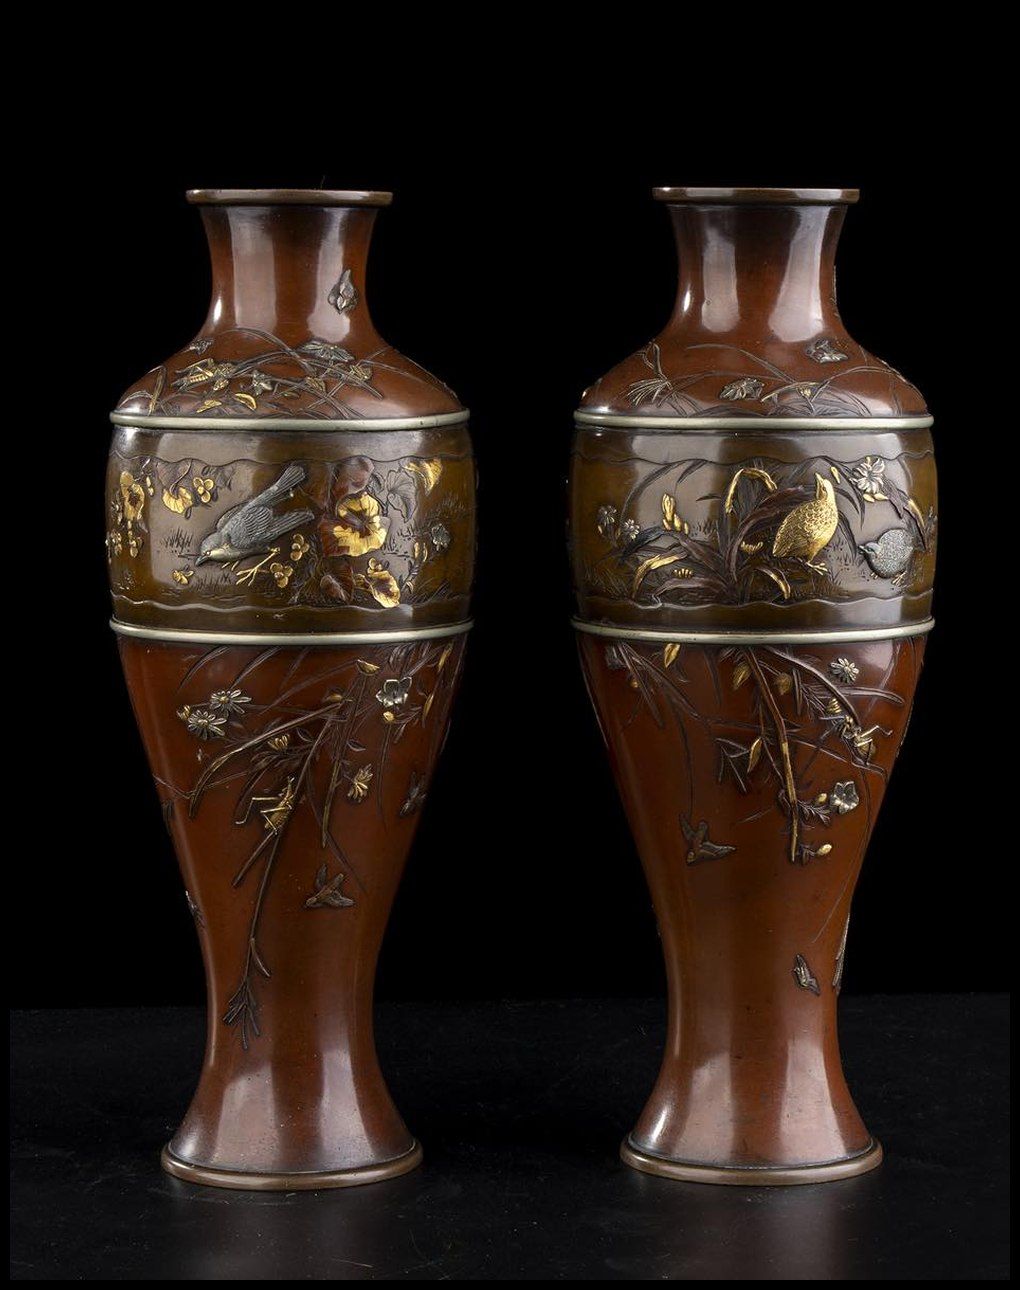 A PAIR OF MIXED METAL INLAID BRONZE BALUSTER VASES COPPIA DI VASI A BALAUSTRO IN&hellip;